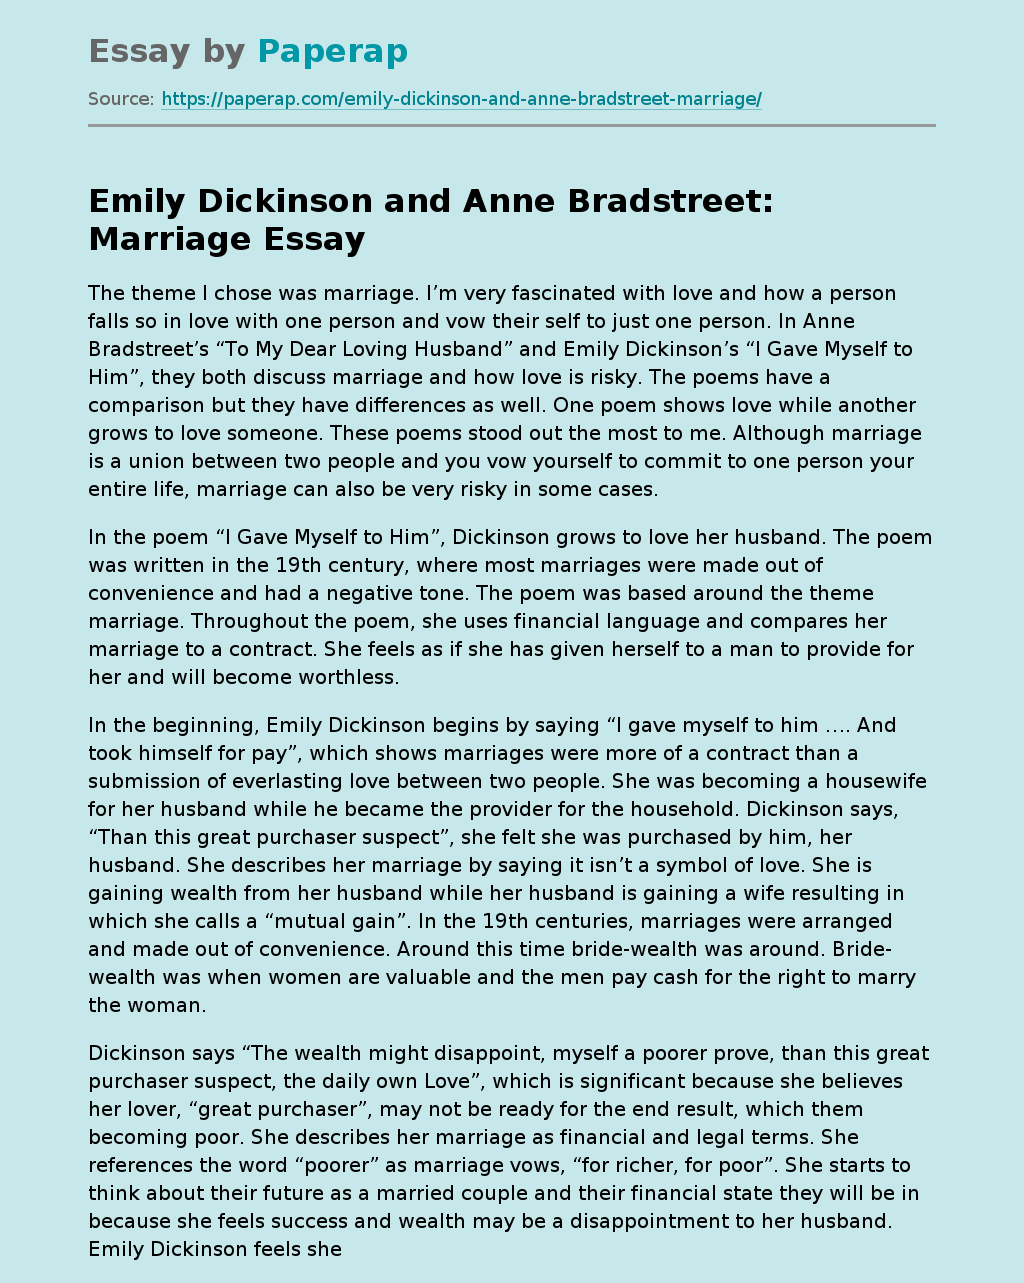 Emily Dickinson and Anne Bradstreet: Marriage